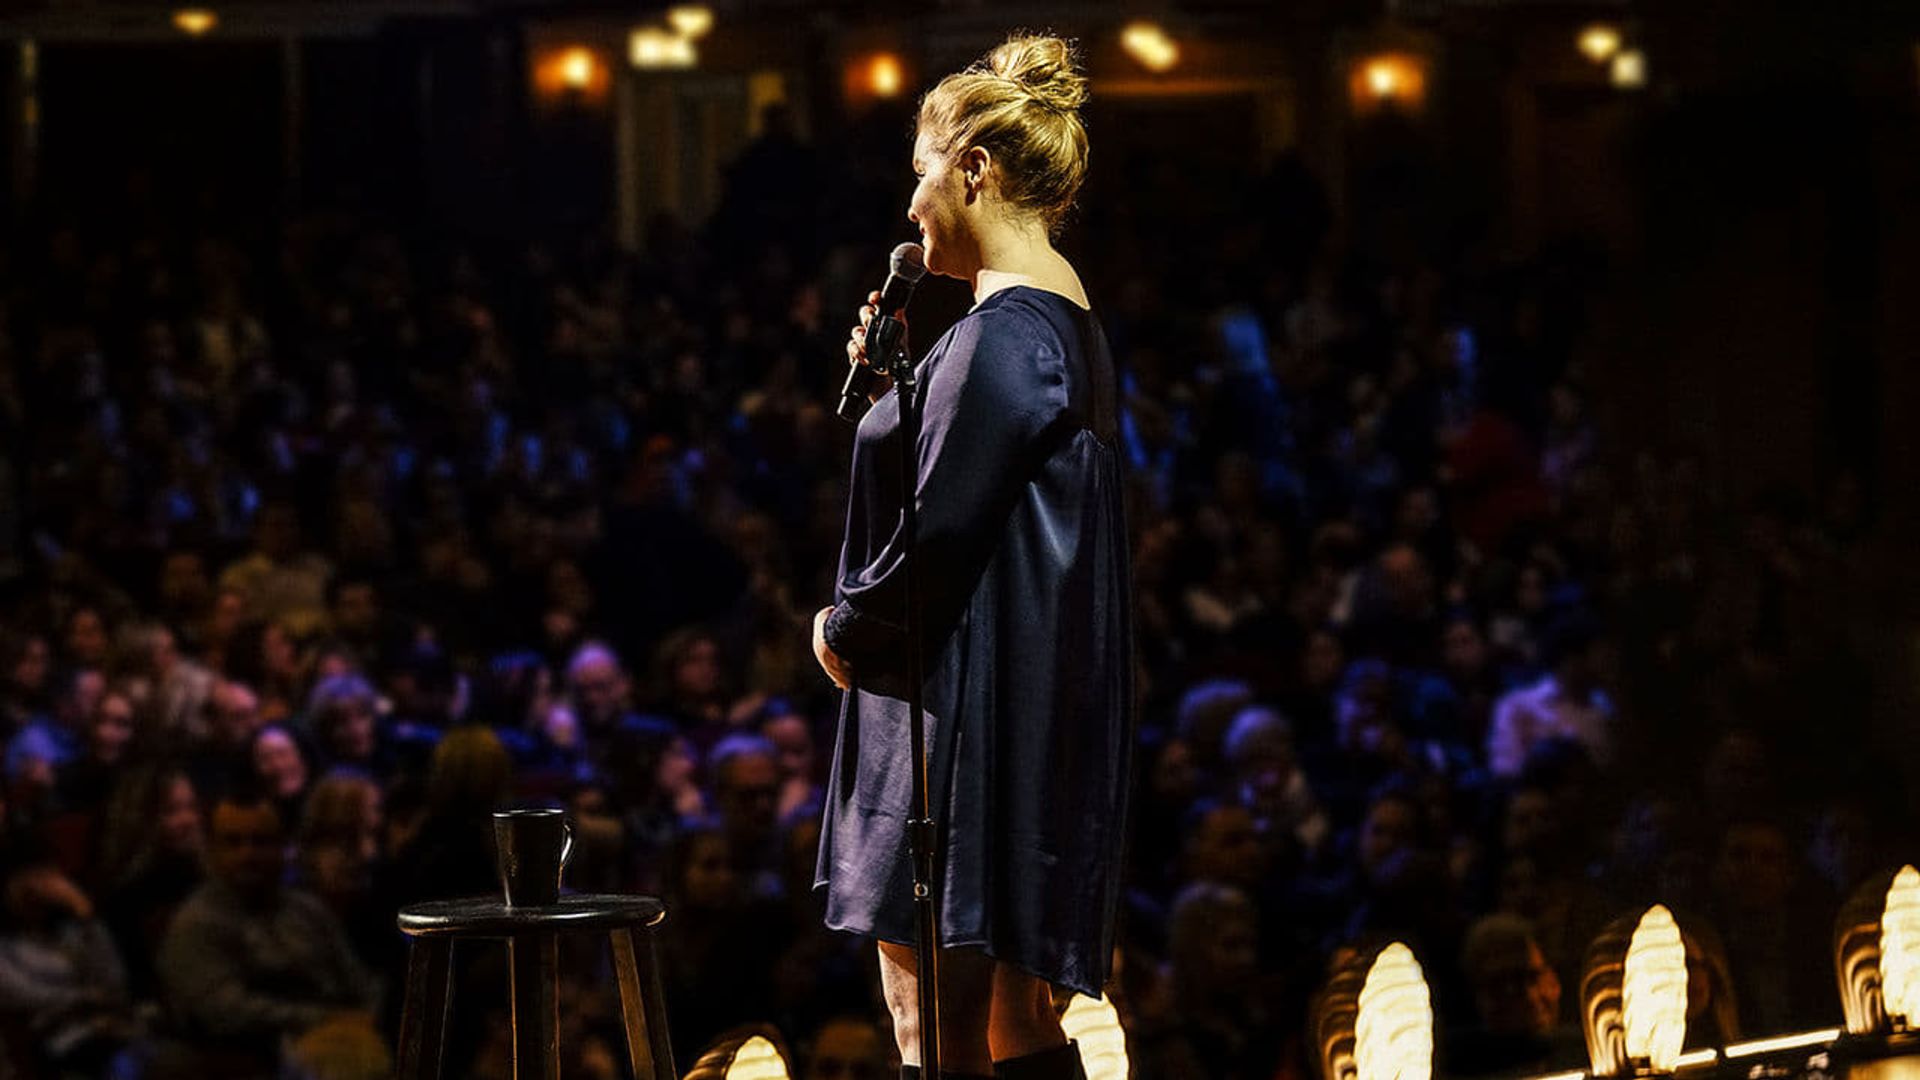 Amy Schumer: Growing background